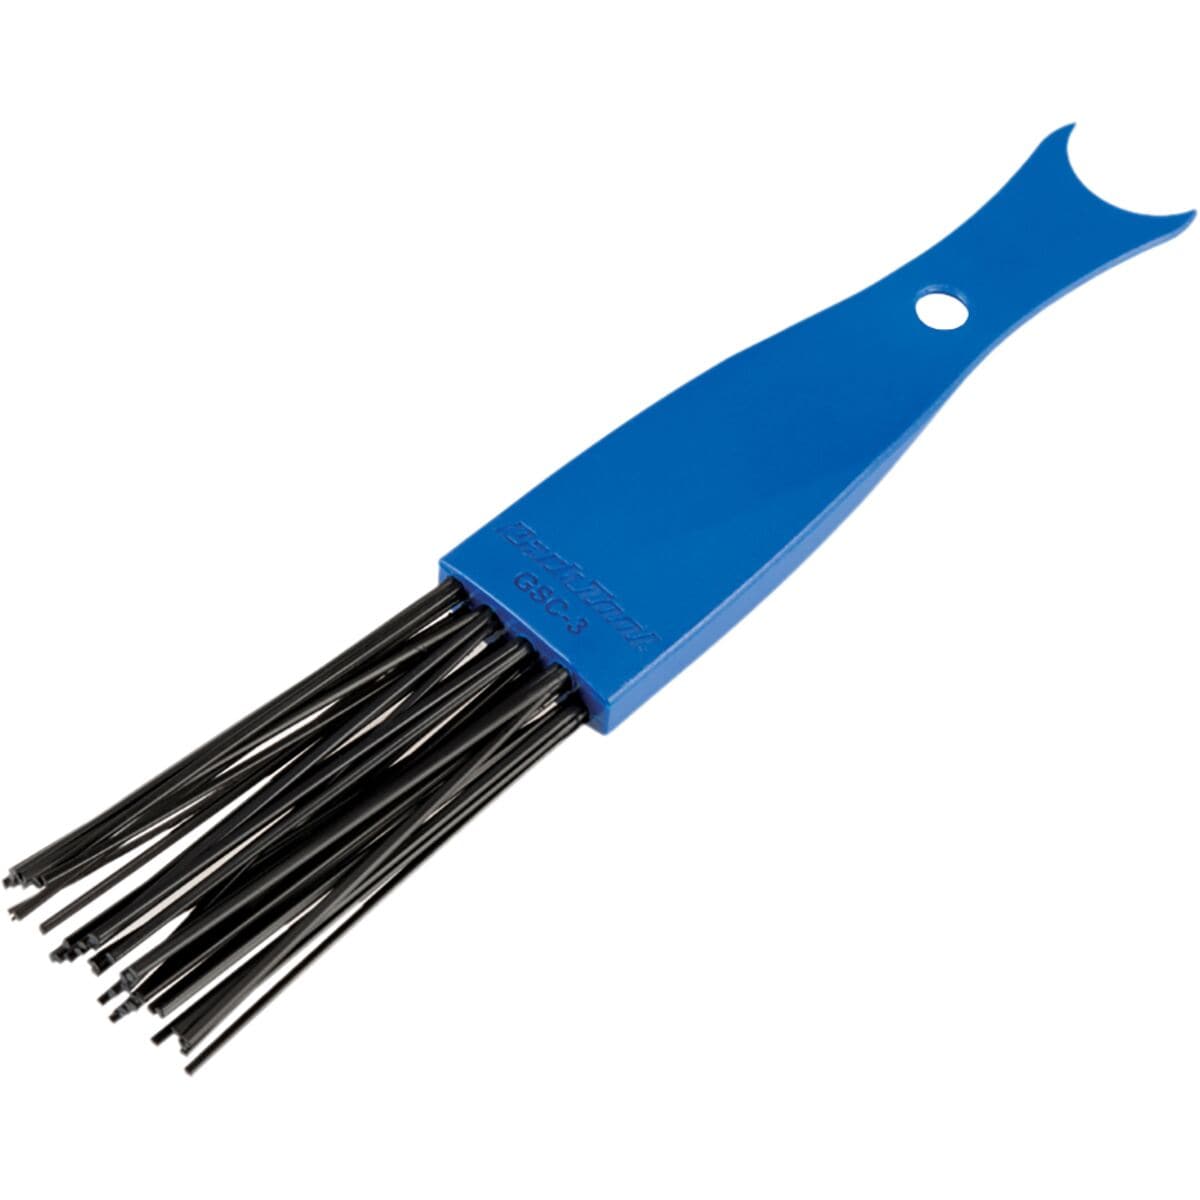 Park Tool Drivetrain Cleaning Brush Blue, One Size